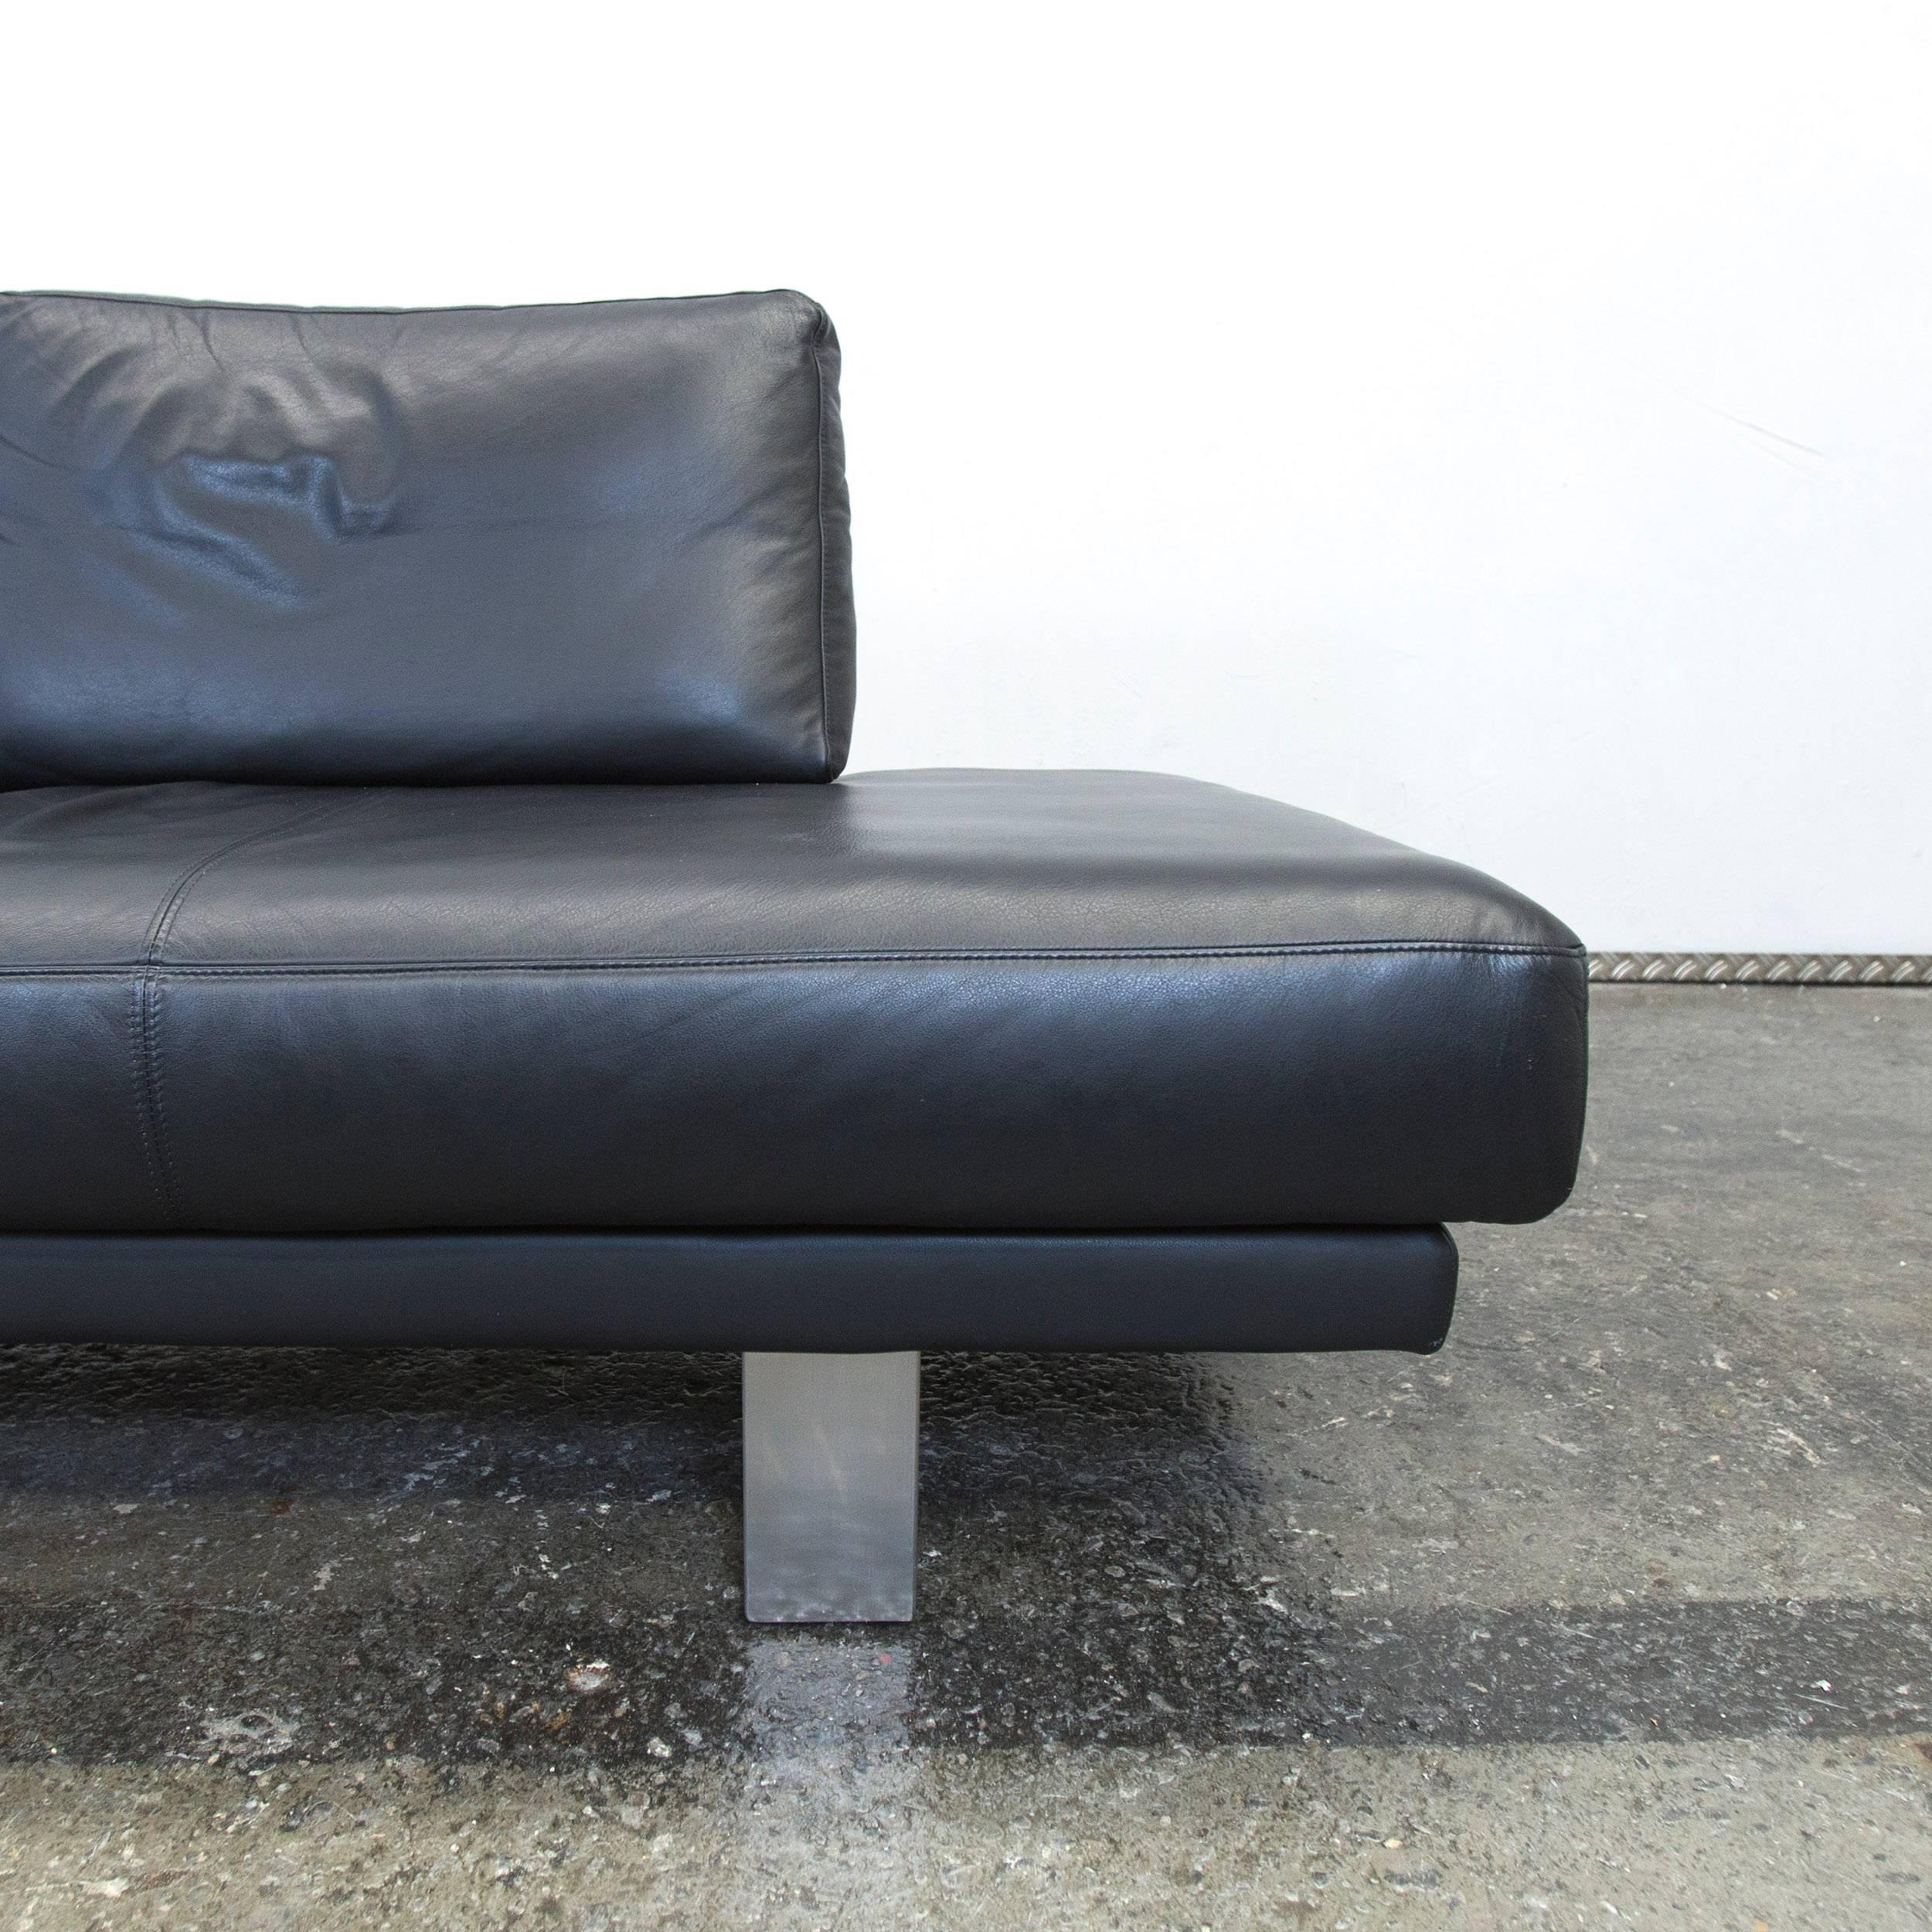 Rolf Benz Sob 6600 Designer Leather Sofa Black Three-Seat Couch Modern In Good Condition For Sale In Cologne, DE